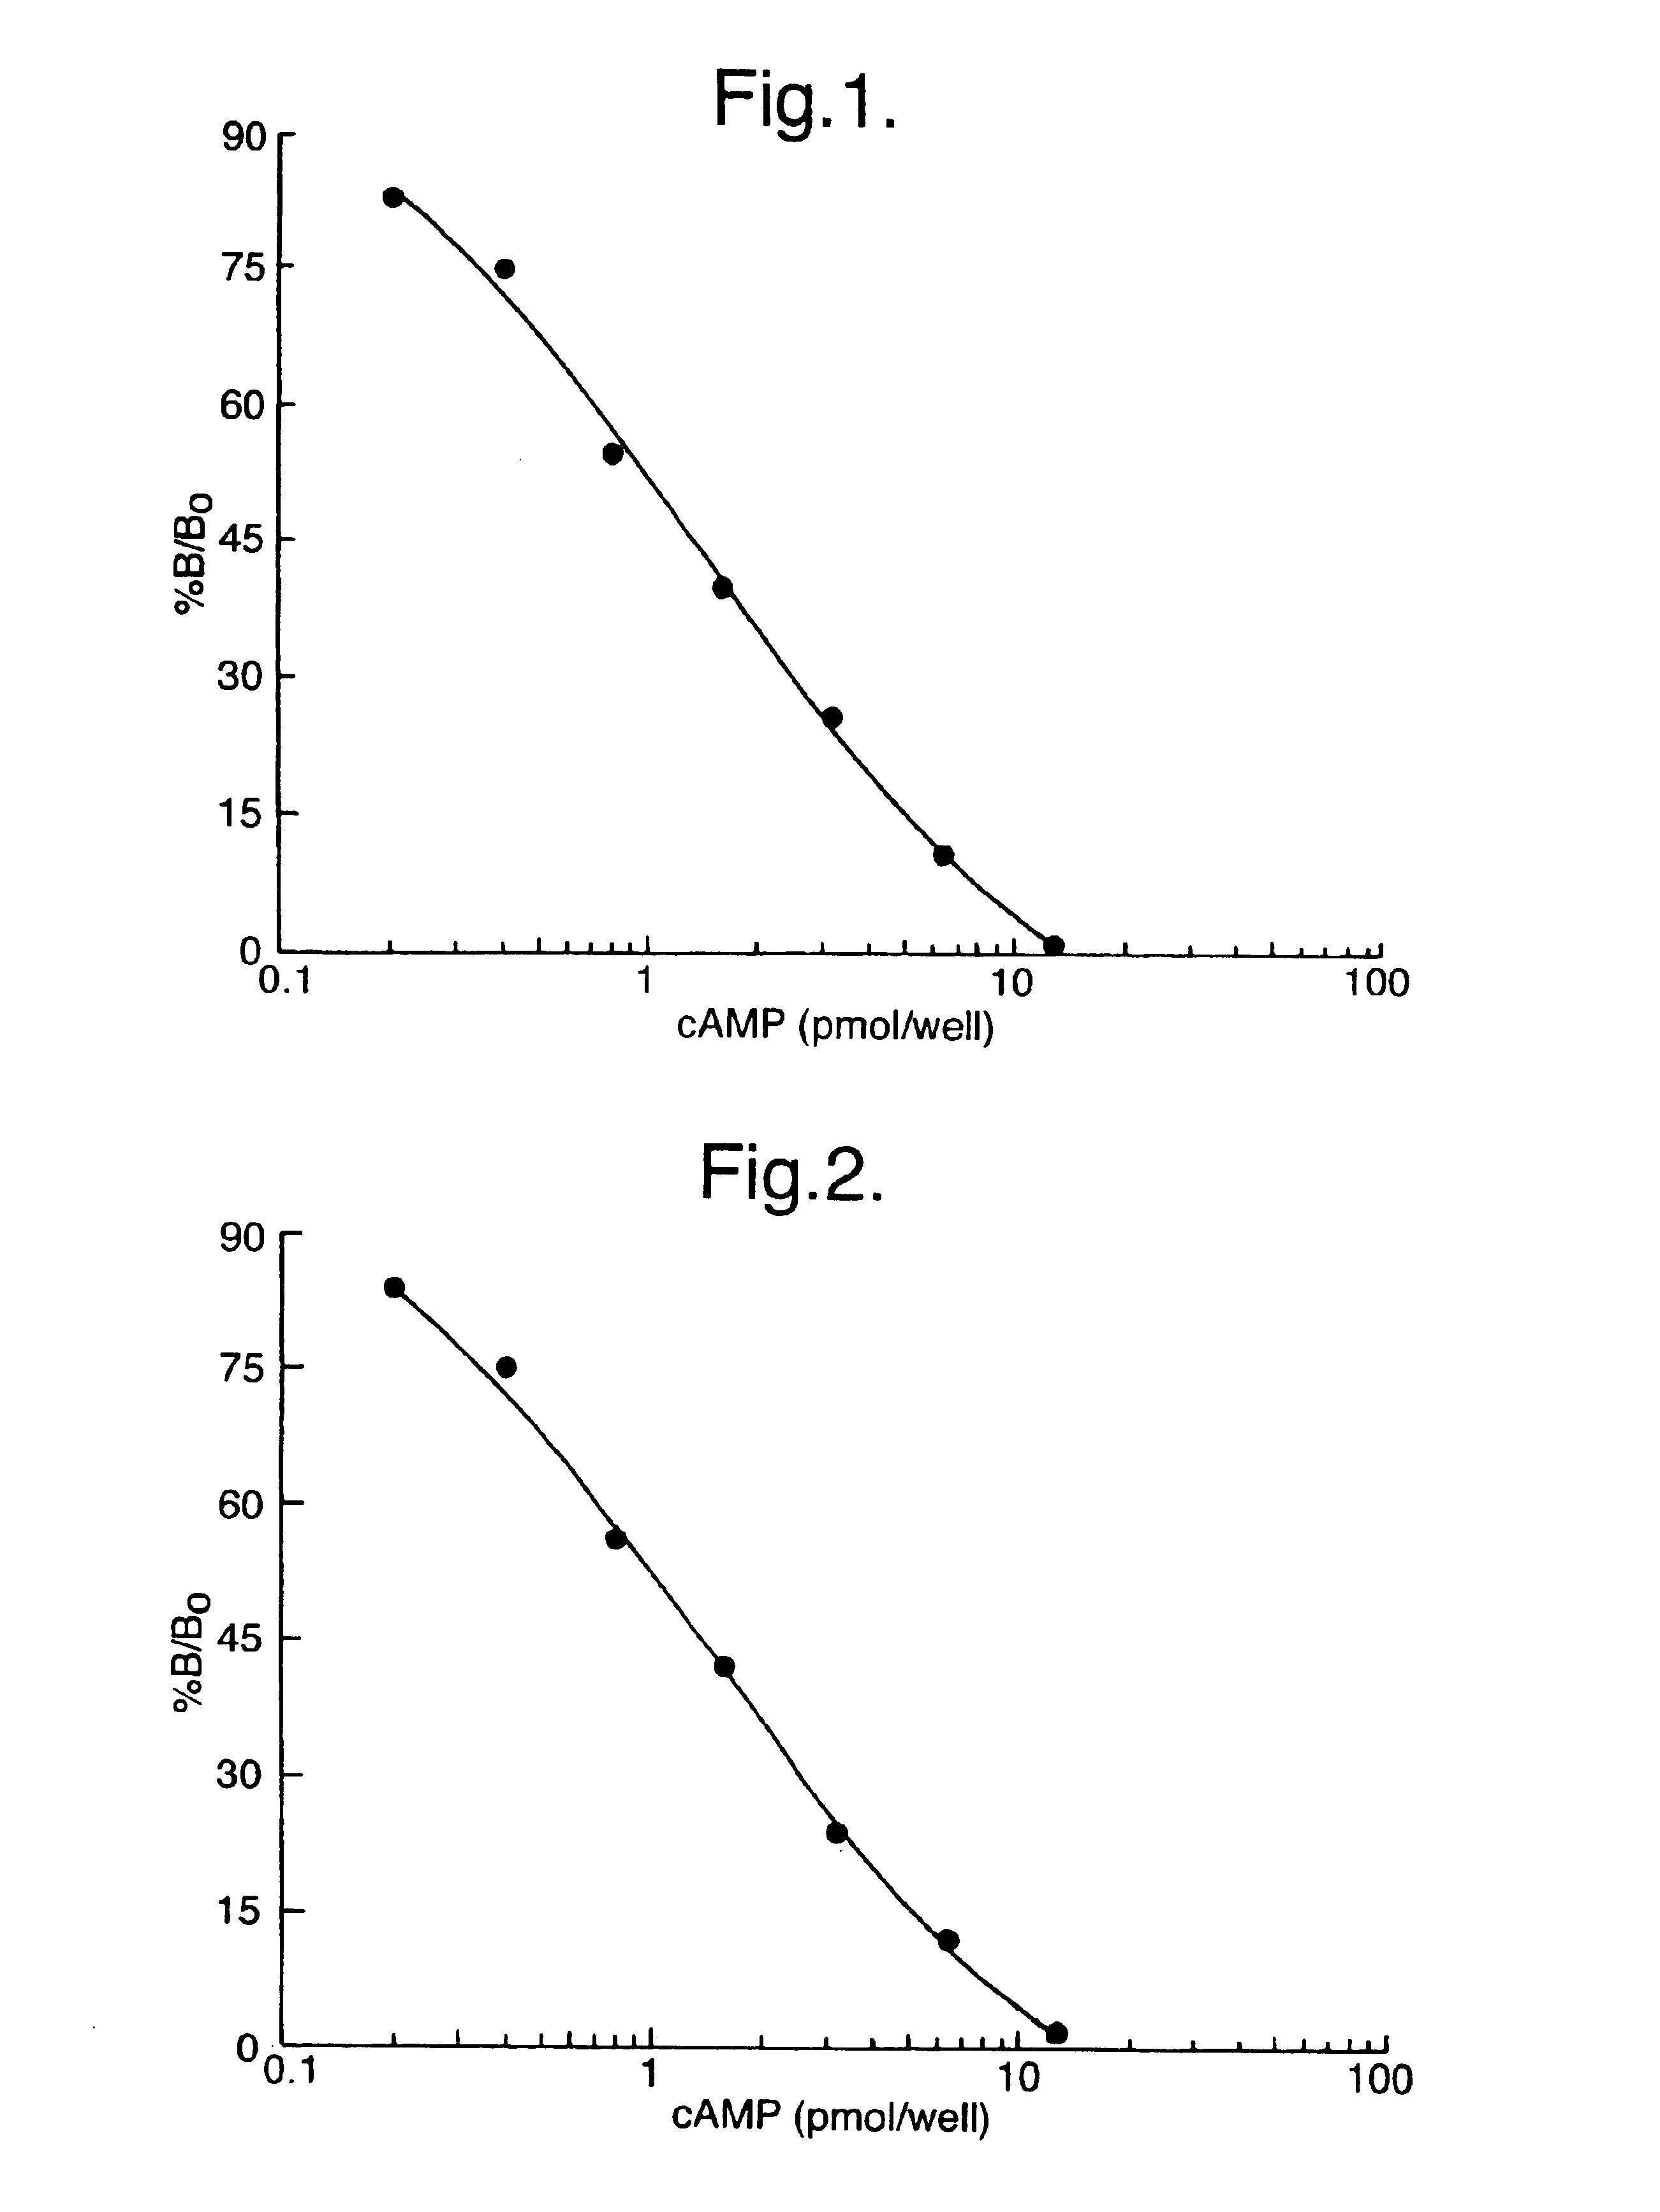 In-situ cell extraction and assay method